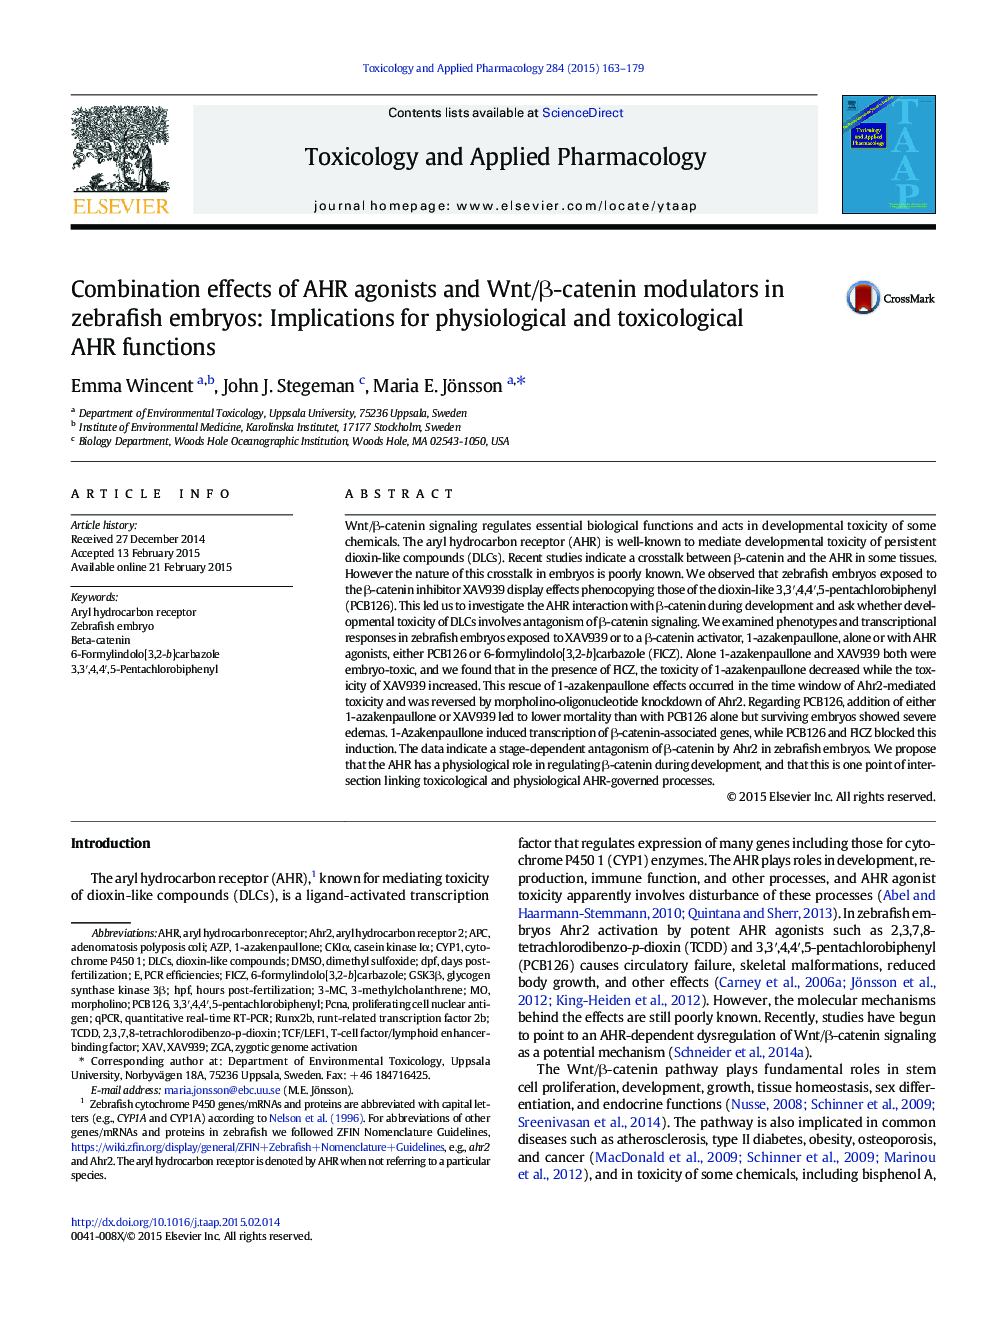 Combination effects of AHR agonists and Wnt/Î²-catenin modulators in zebrafish embryos: Implications for physiological and toxicological AHR functions